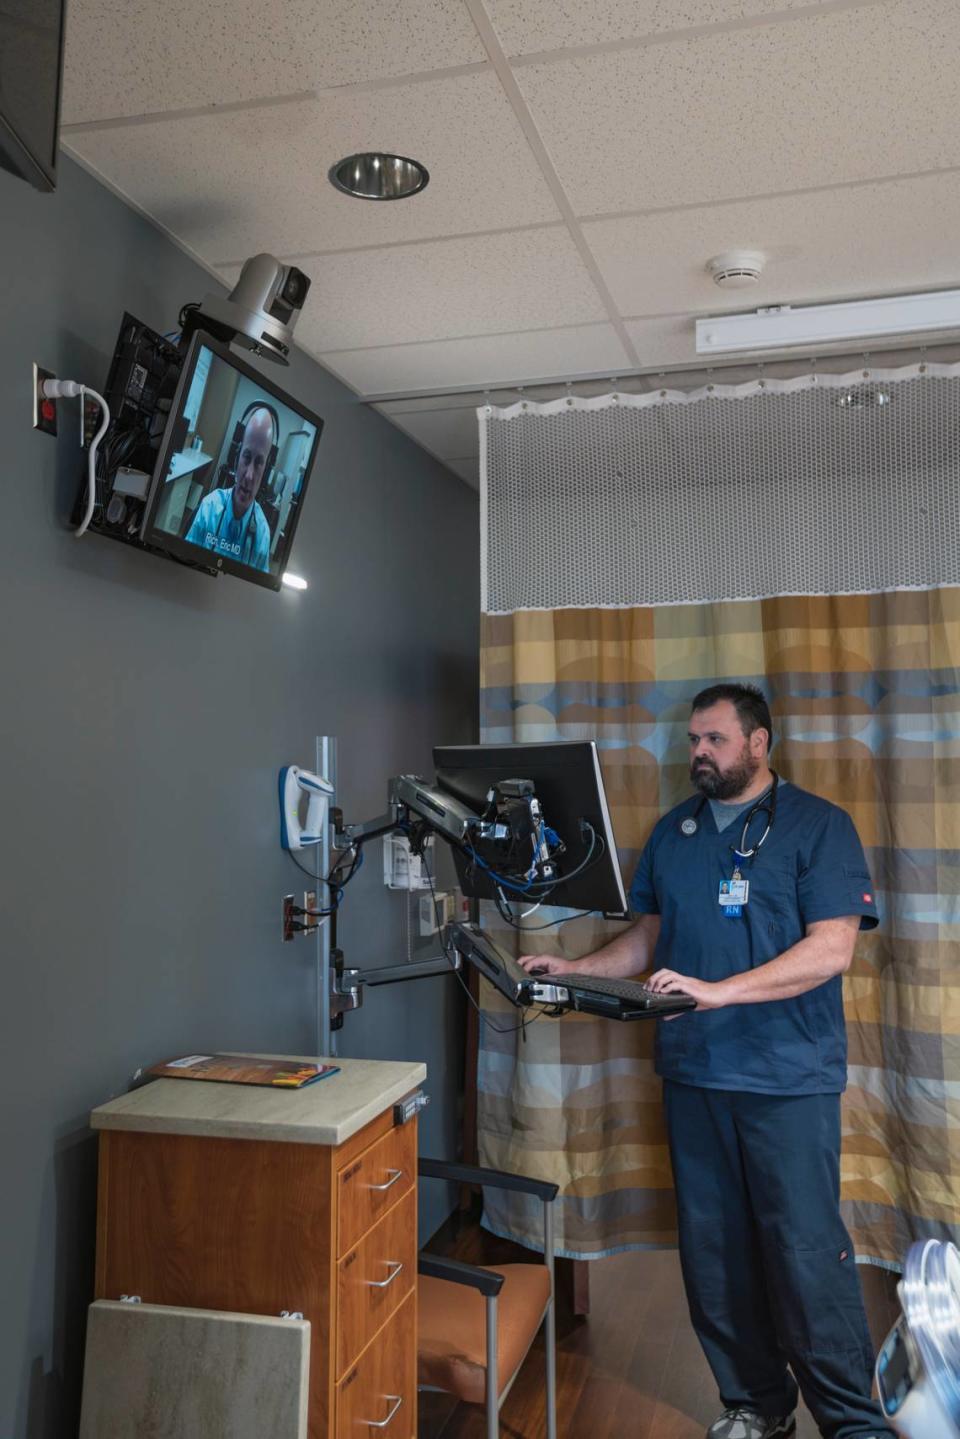 Josh Patterson, a registered nurse at St. Luke’s Health System, looks at a computer in a patient’s room in Nampa. Dr. Eric Rich appears on the other screen.